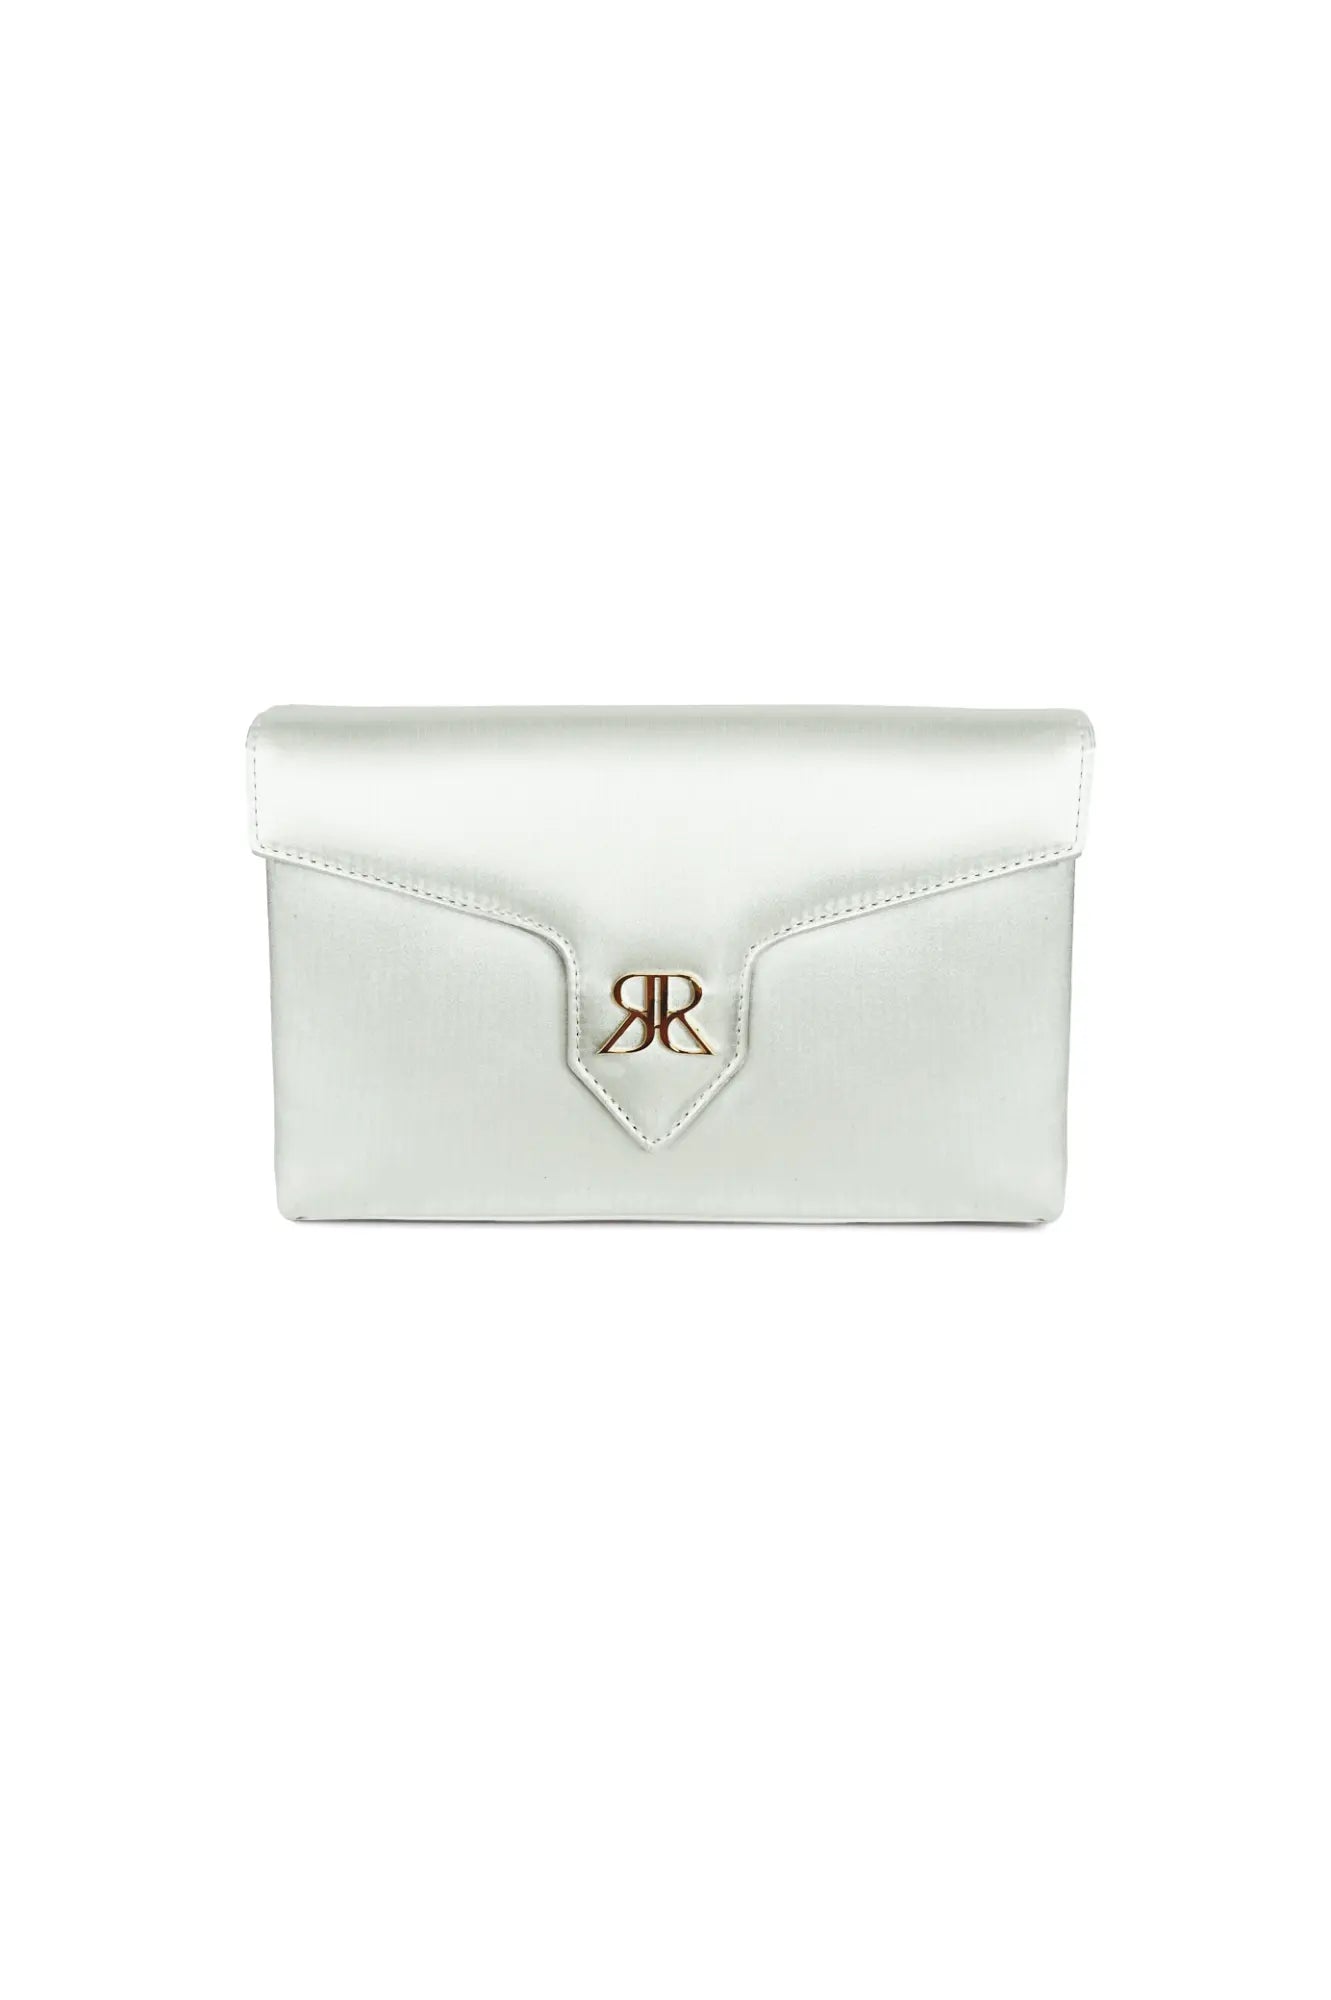 Duchess Satin Love Note Envelope Clutch Sage Green with a metallic monogram closure from The Bella Rosa Collection.